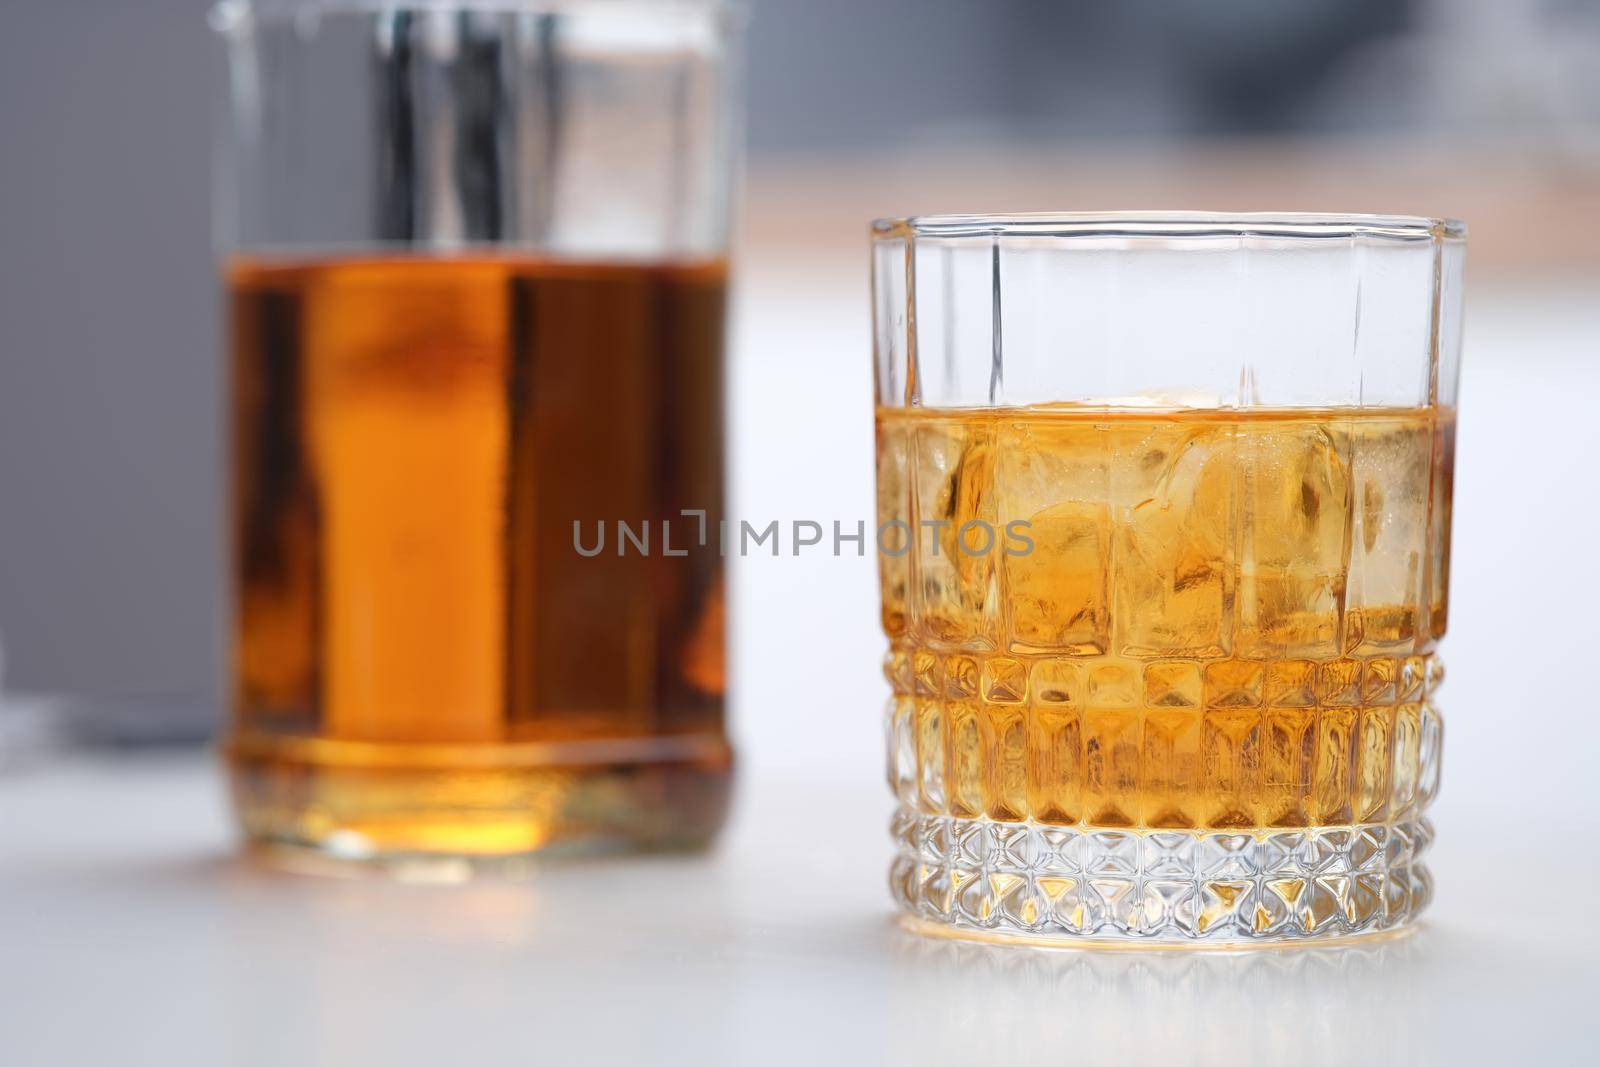 Brown alcoholic cocktail with ice in a wide glass, close-up. Incomplete whiskey bottle and glass on gray table background